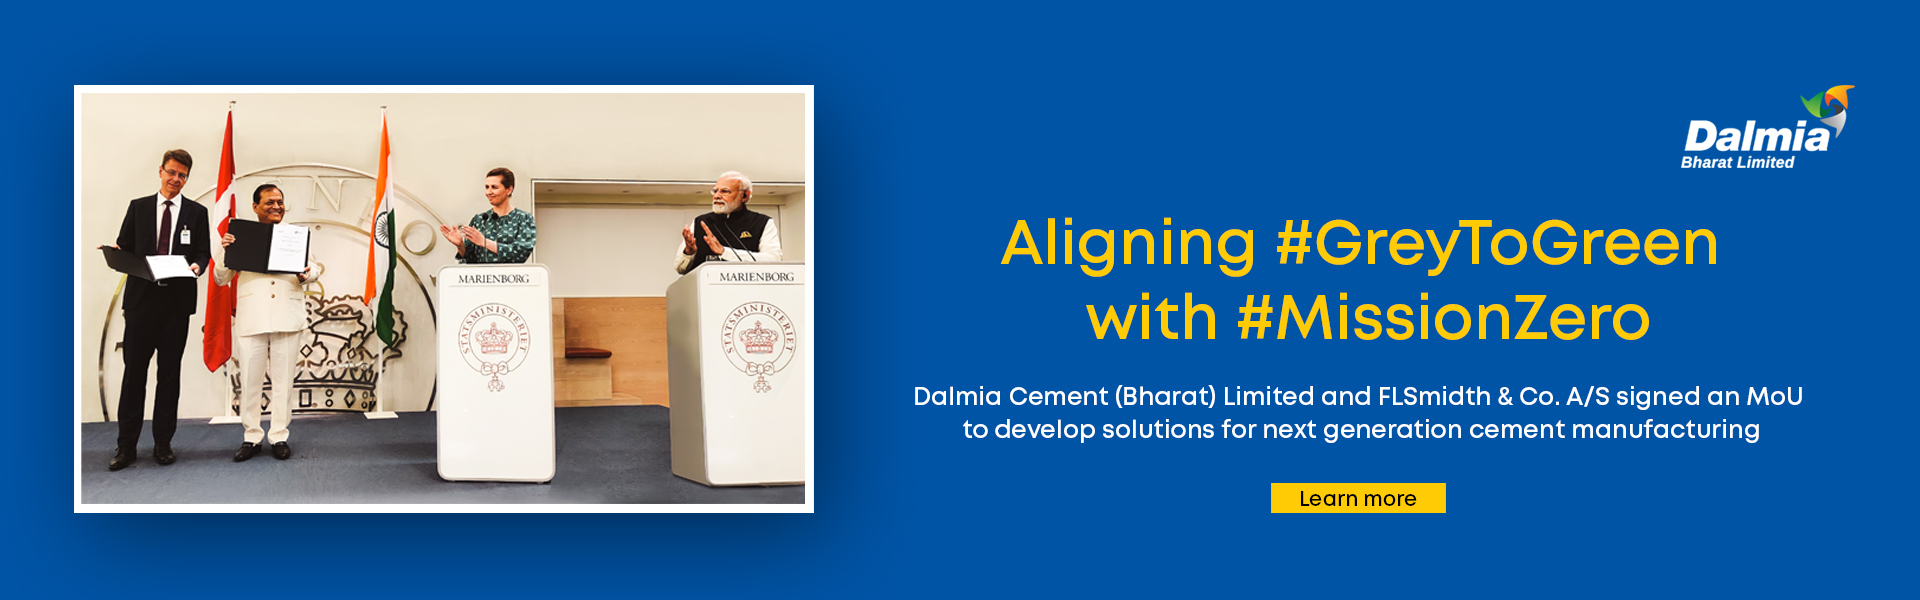 Dalmia Bharat, FLSmidth join hands to develop more sustainability solutions